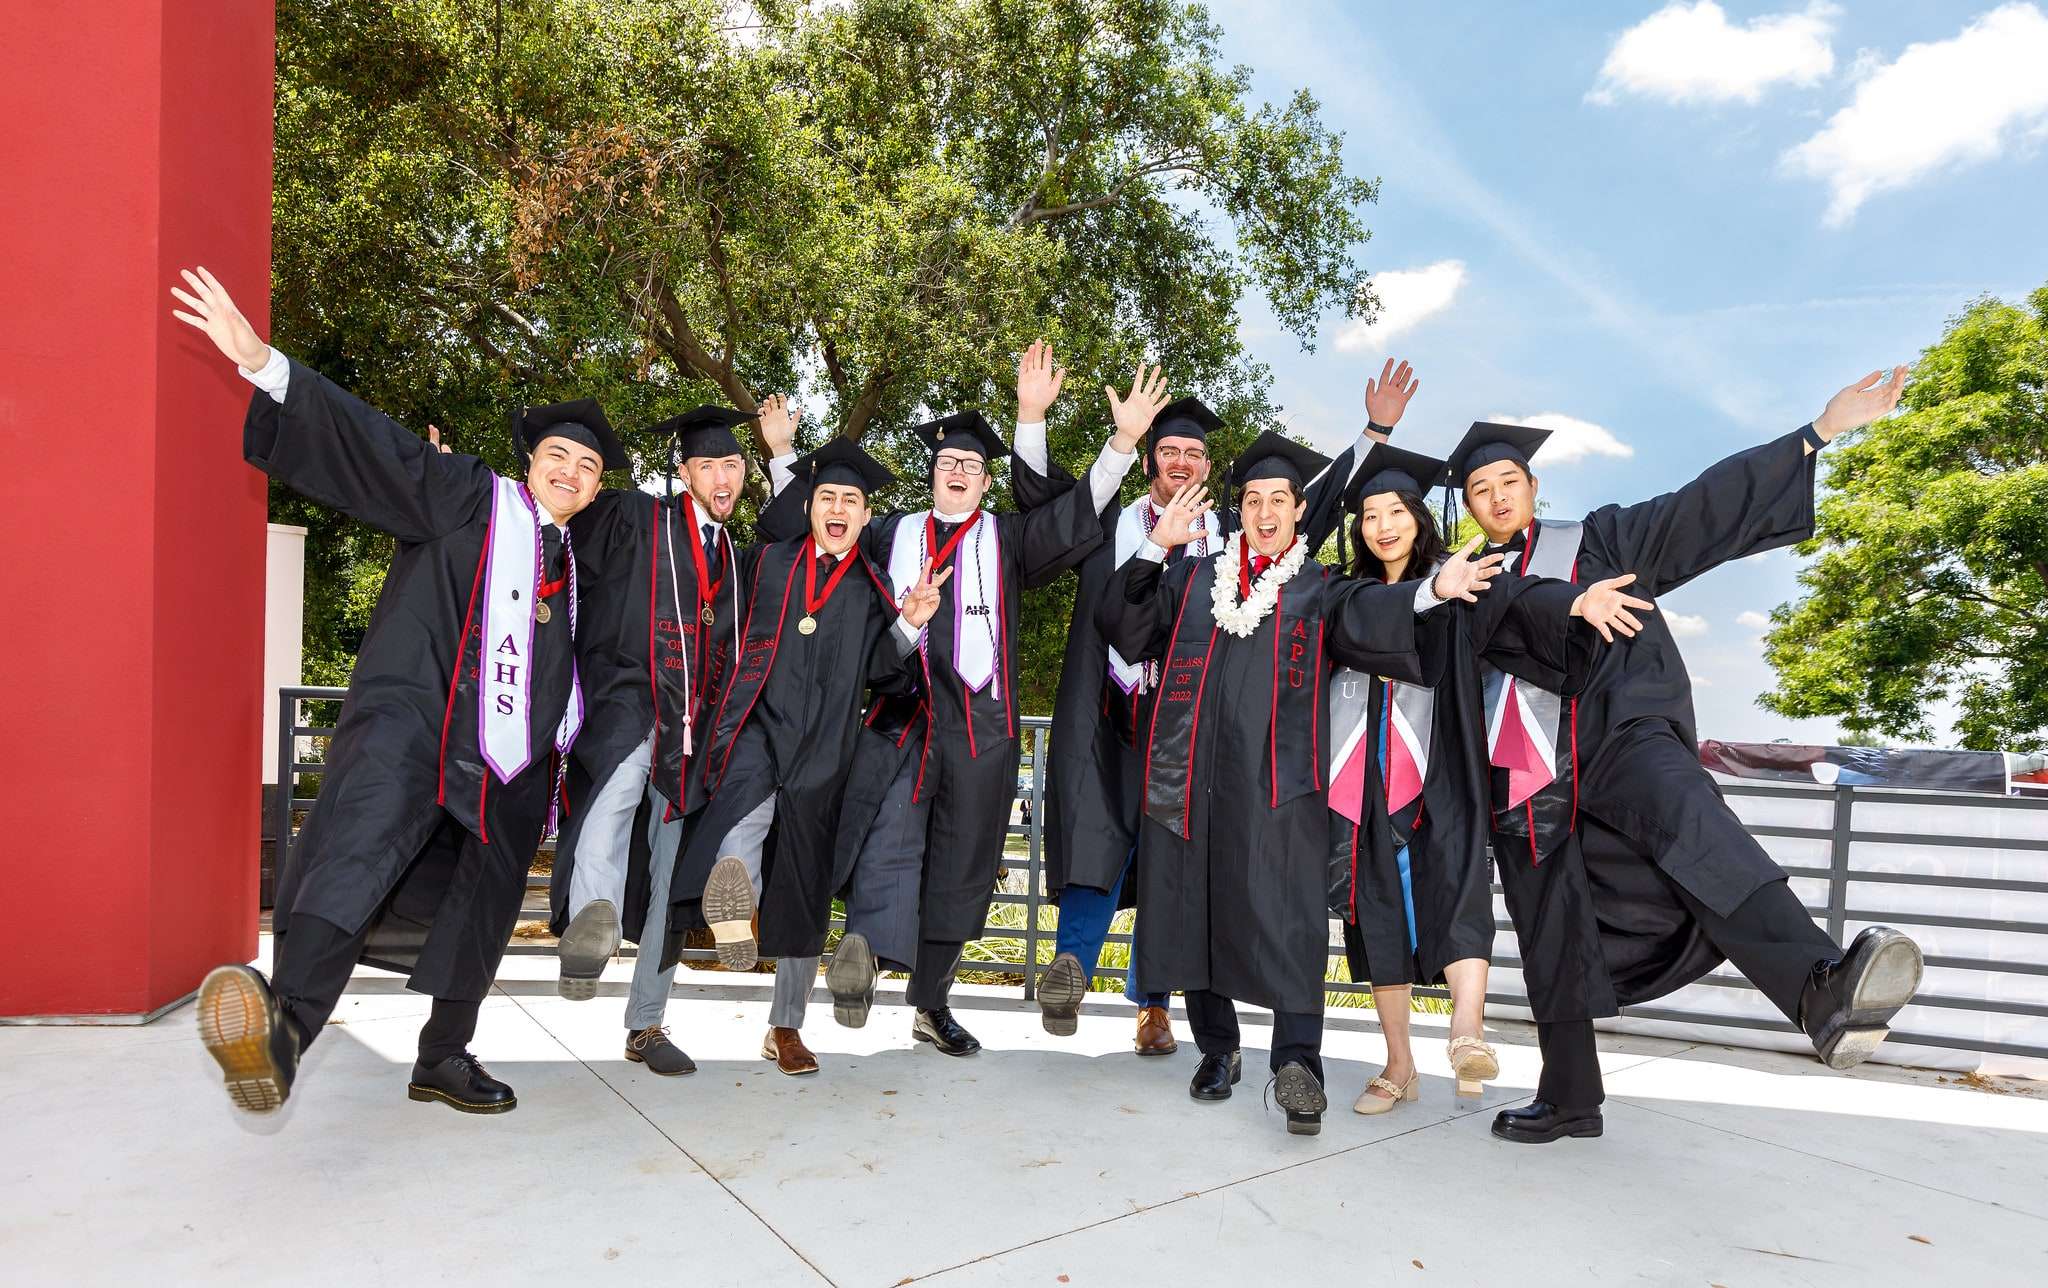 students celebrating their graduation wearing cap and gown